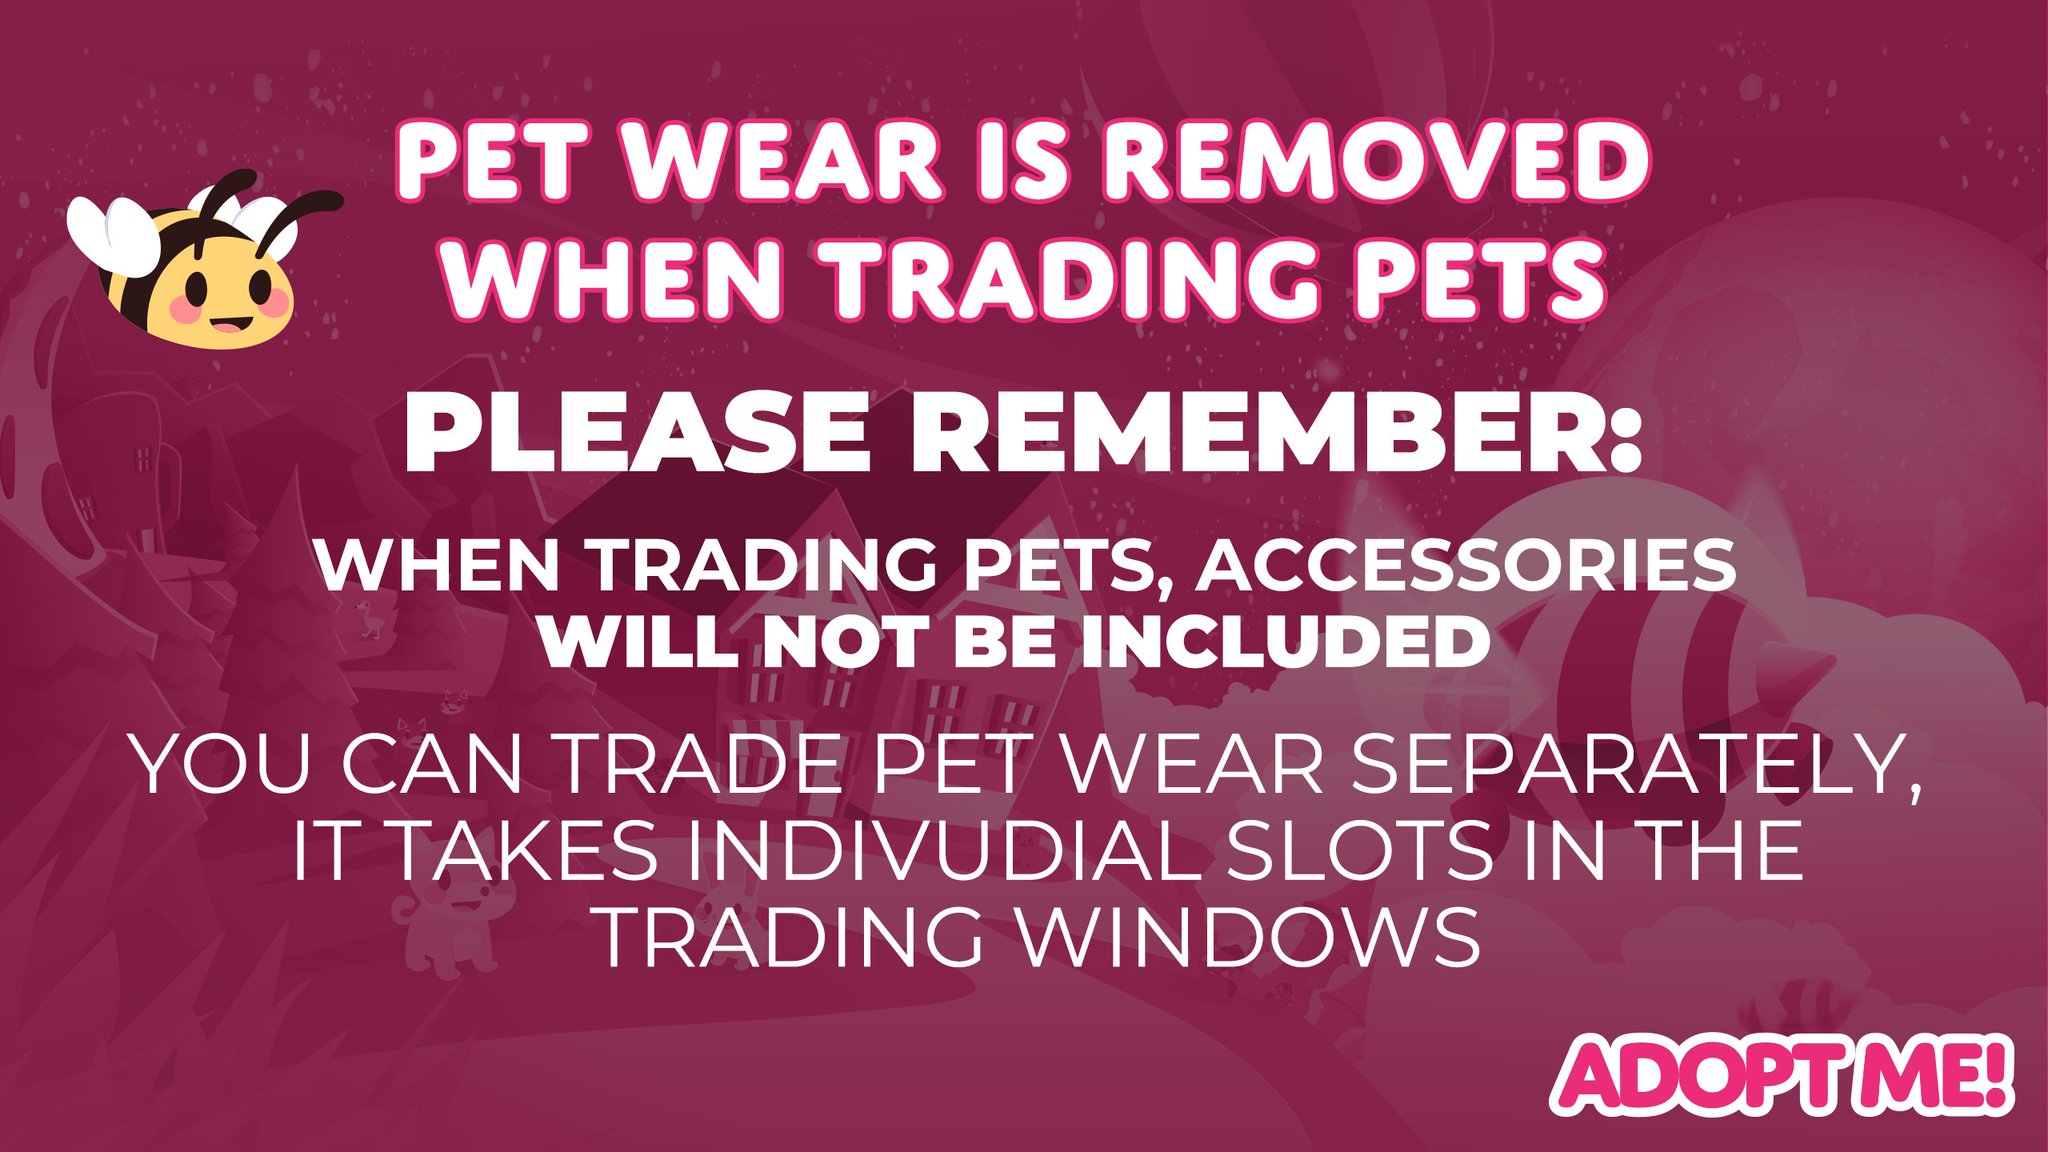 Adopt Me On Twitter Psa When Trading Pet Wear Is Removed From The Pet You Can Trade Pet Wear Separately And It Takes Individual Slots In The Trading Windows You Can T Trade - good trades for dog in roblox adopt me